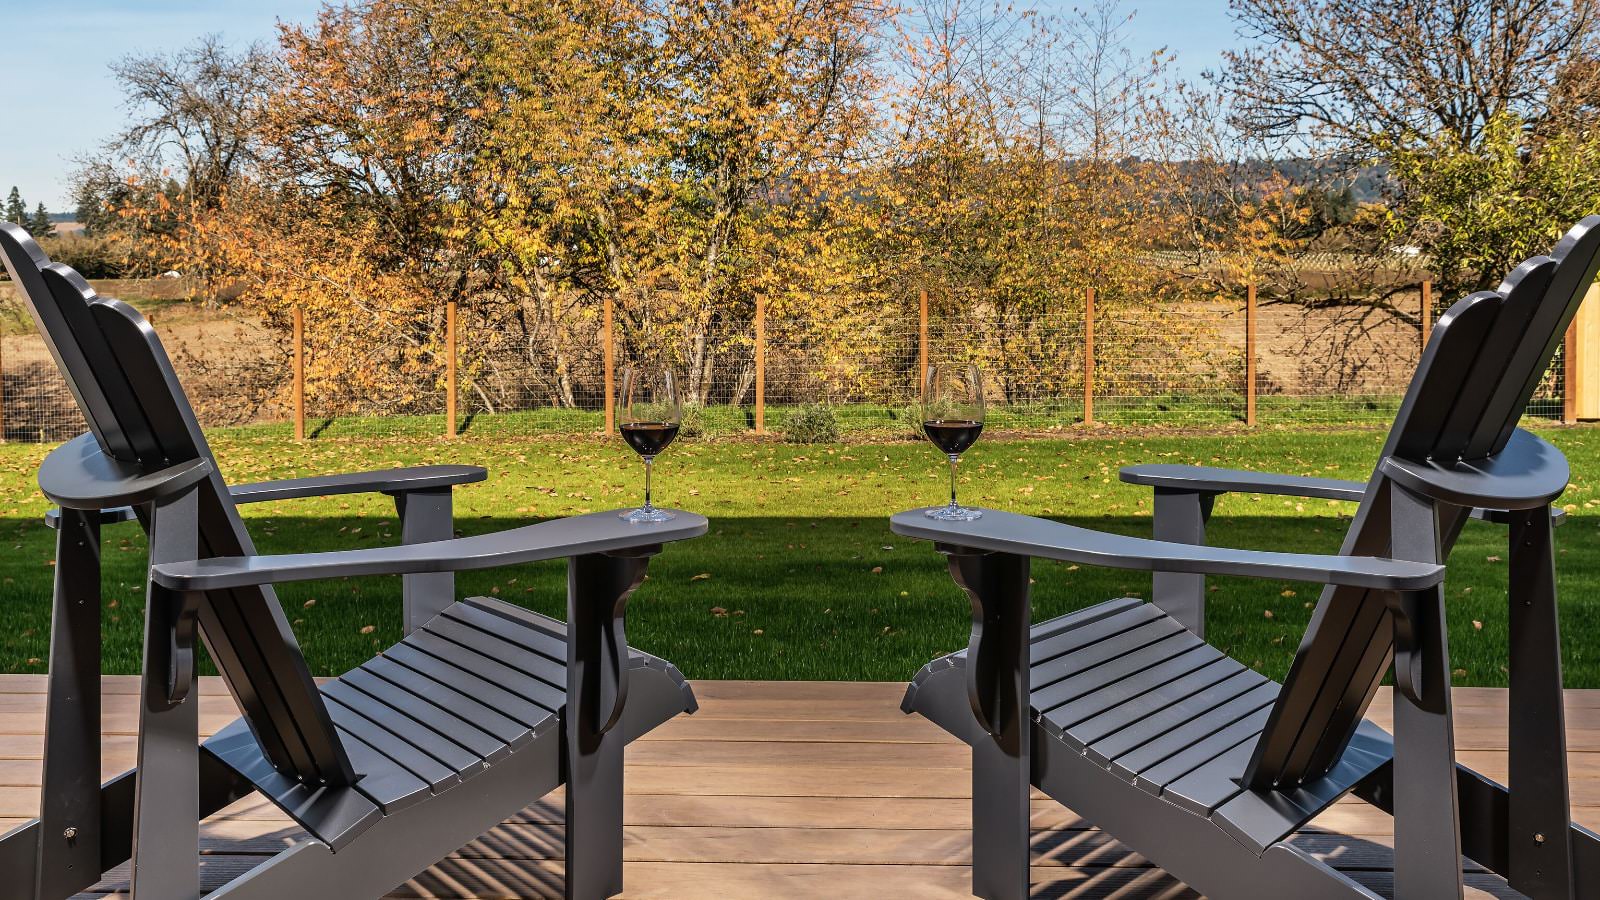 Two gray adirondack chairs each with a glass of red wine with bushes and trees in the background with fall color